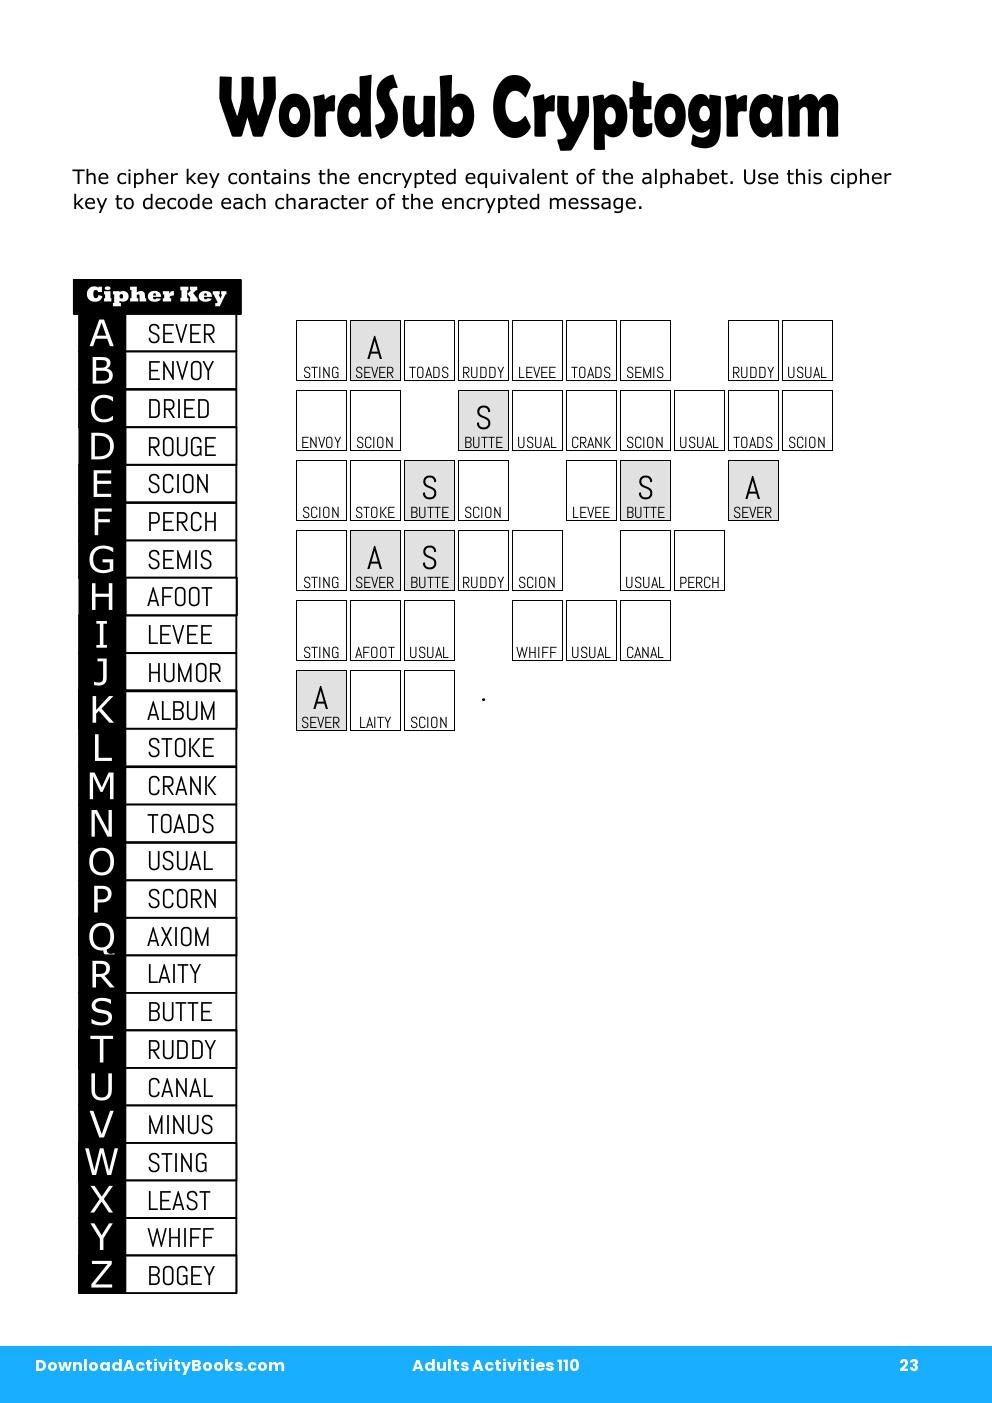 WordSub Cryptogram in Adults Activities 110